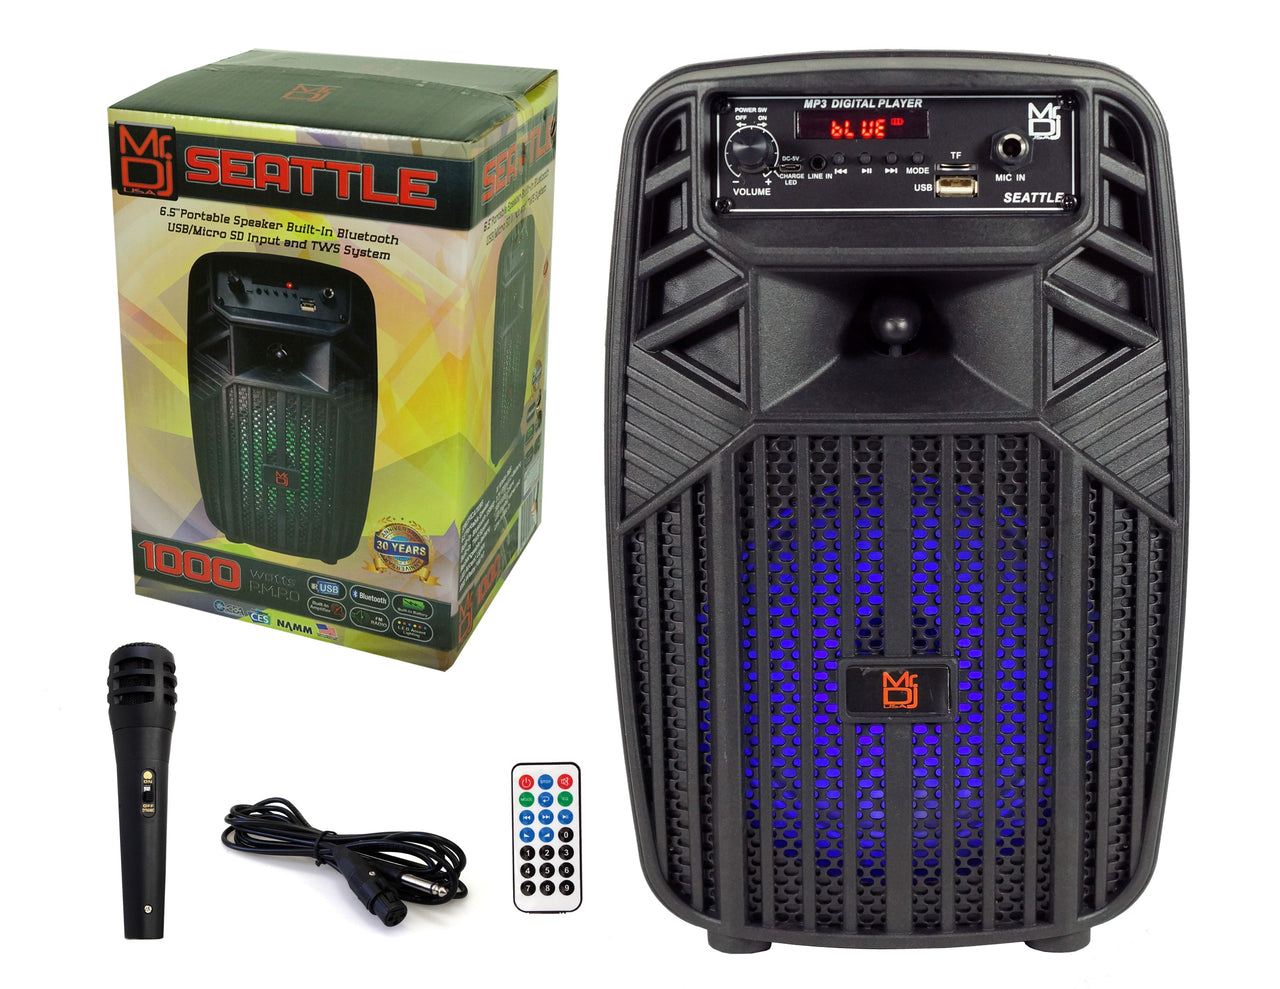 Mr. Dj SEATTLE 6.5" Portable Active Speaker With Rechargeable Battery 1000 Watts P.M.P.O